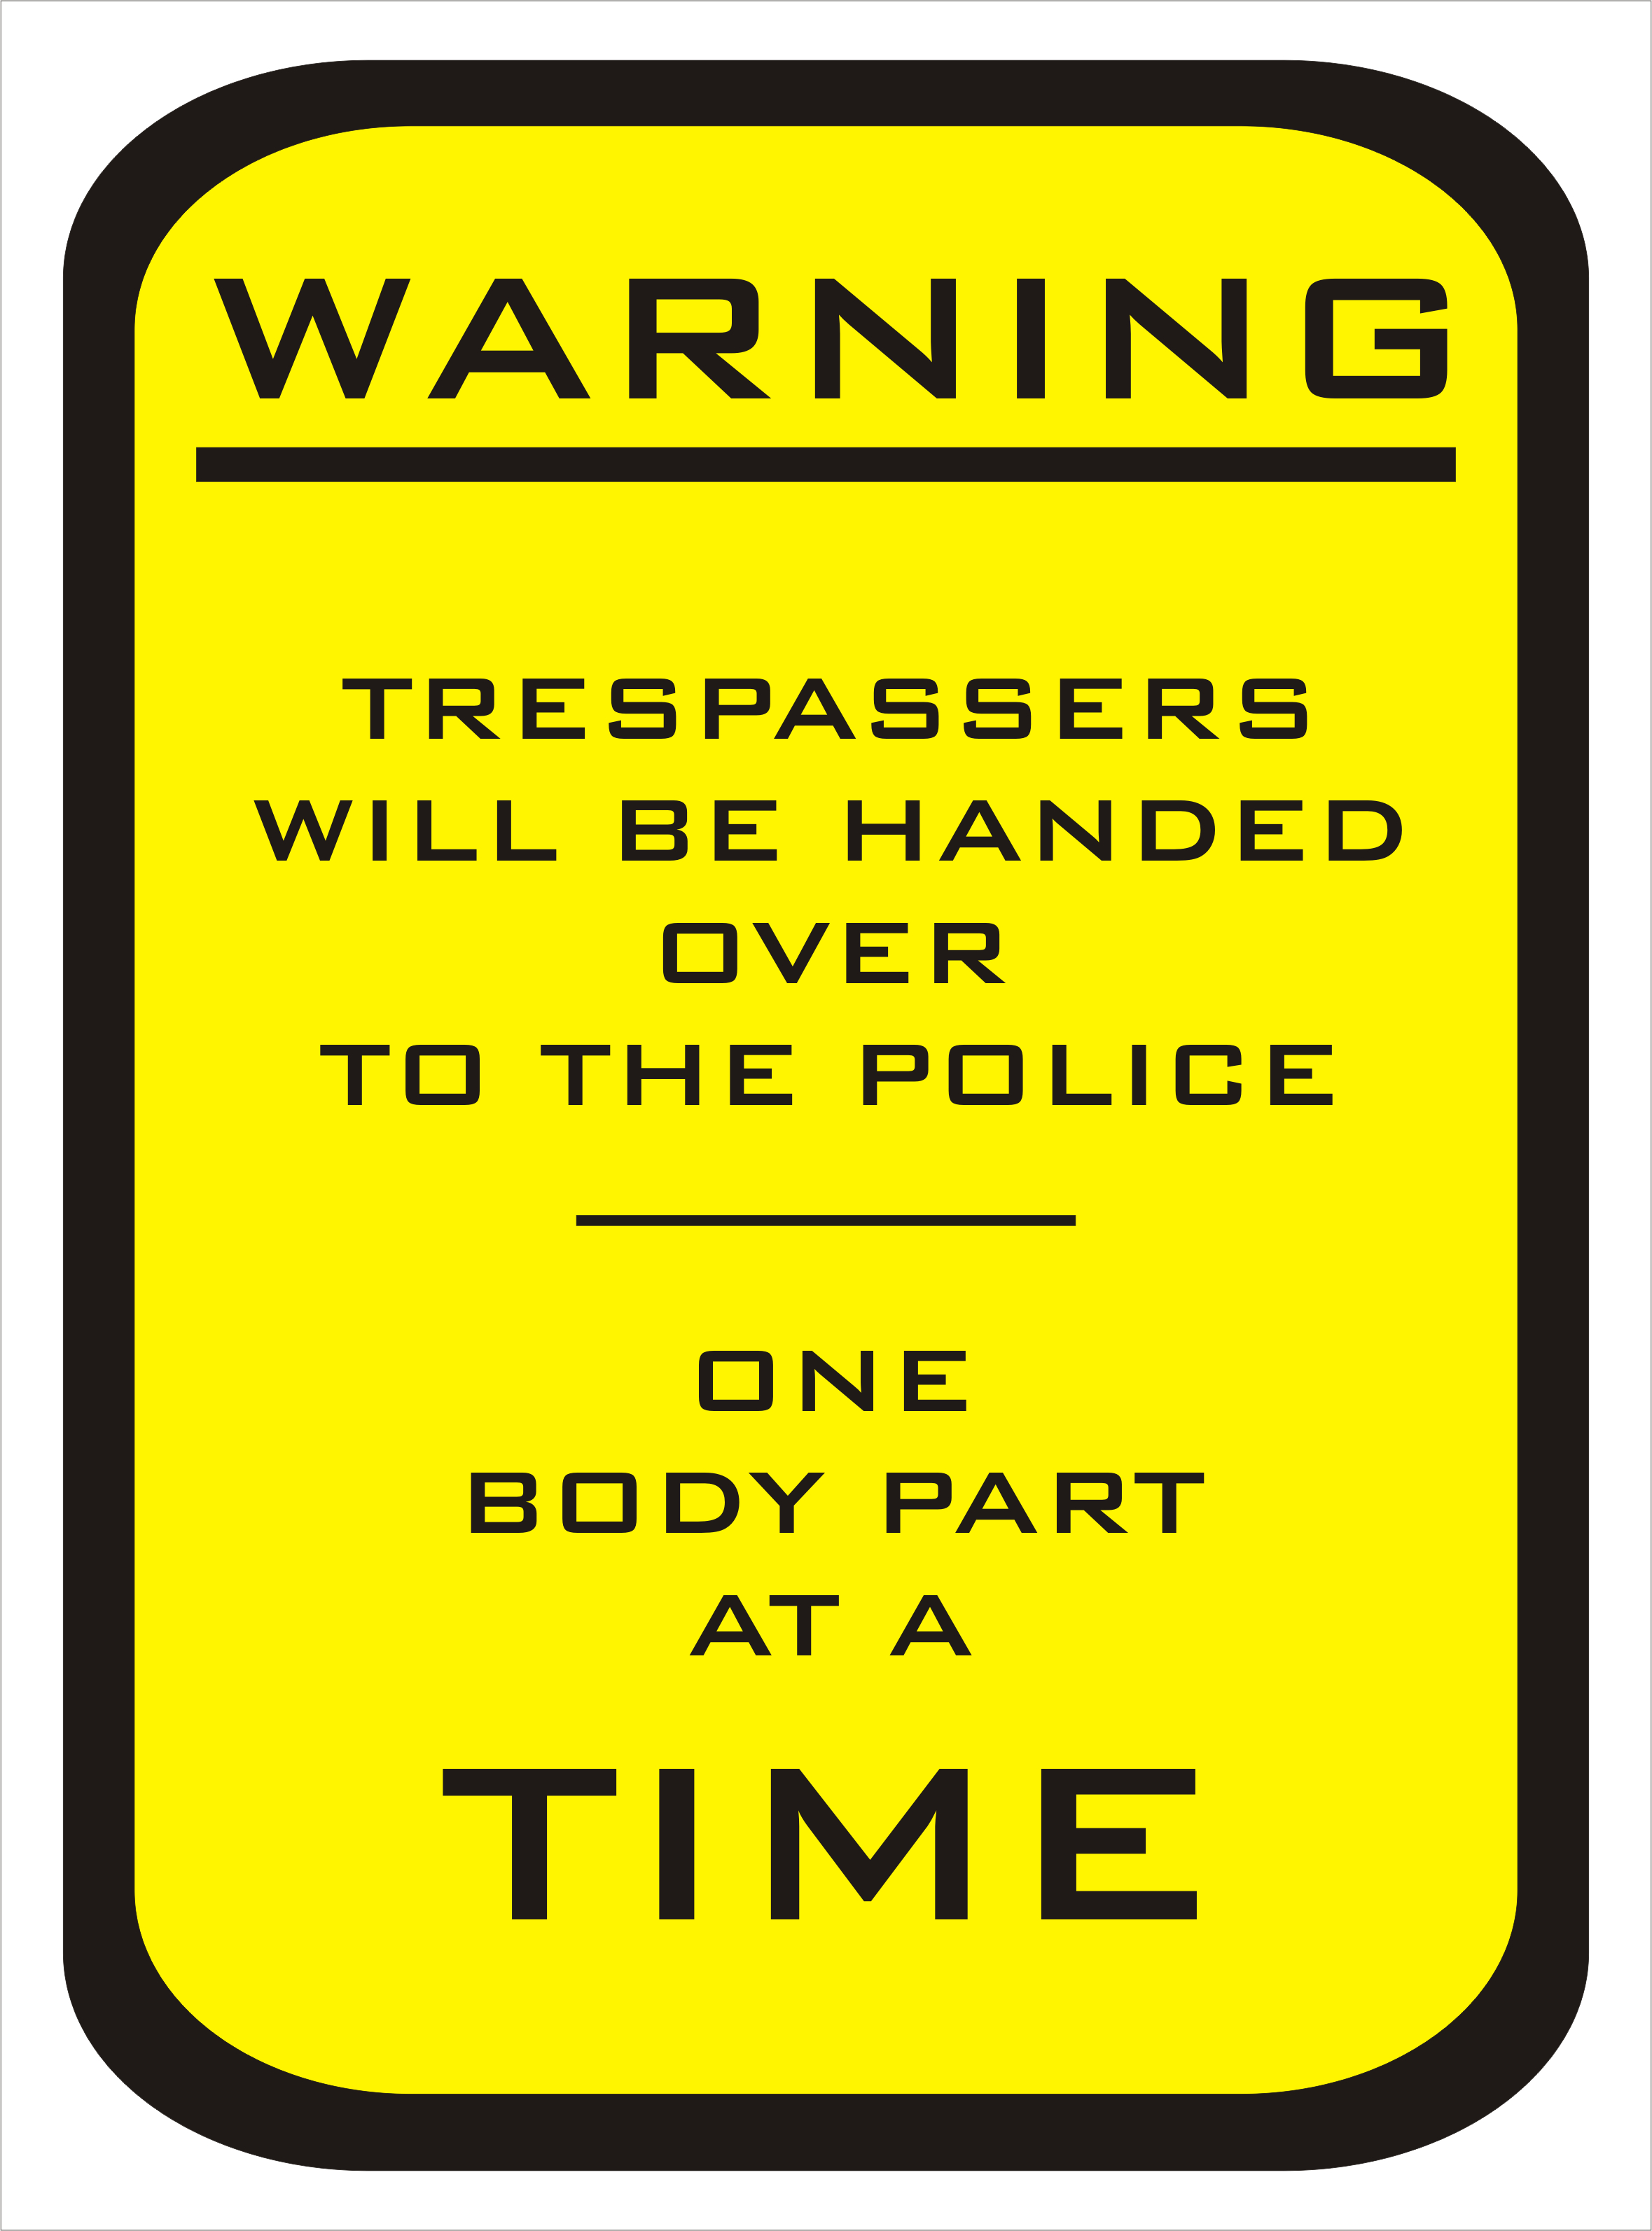 Warning Trespassers will be handed over to the police on body part at a time sign